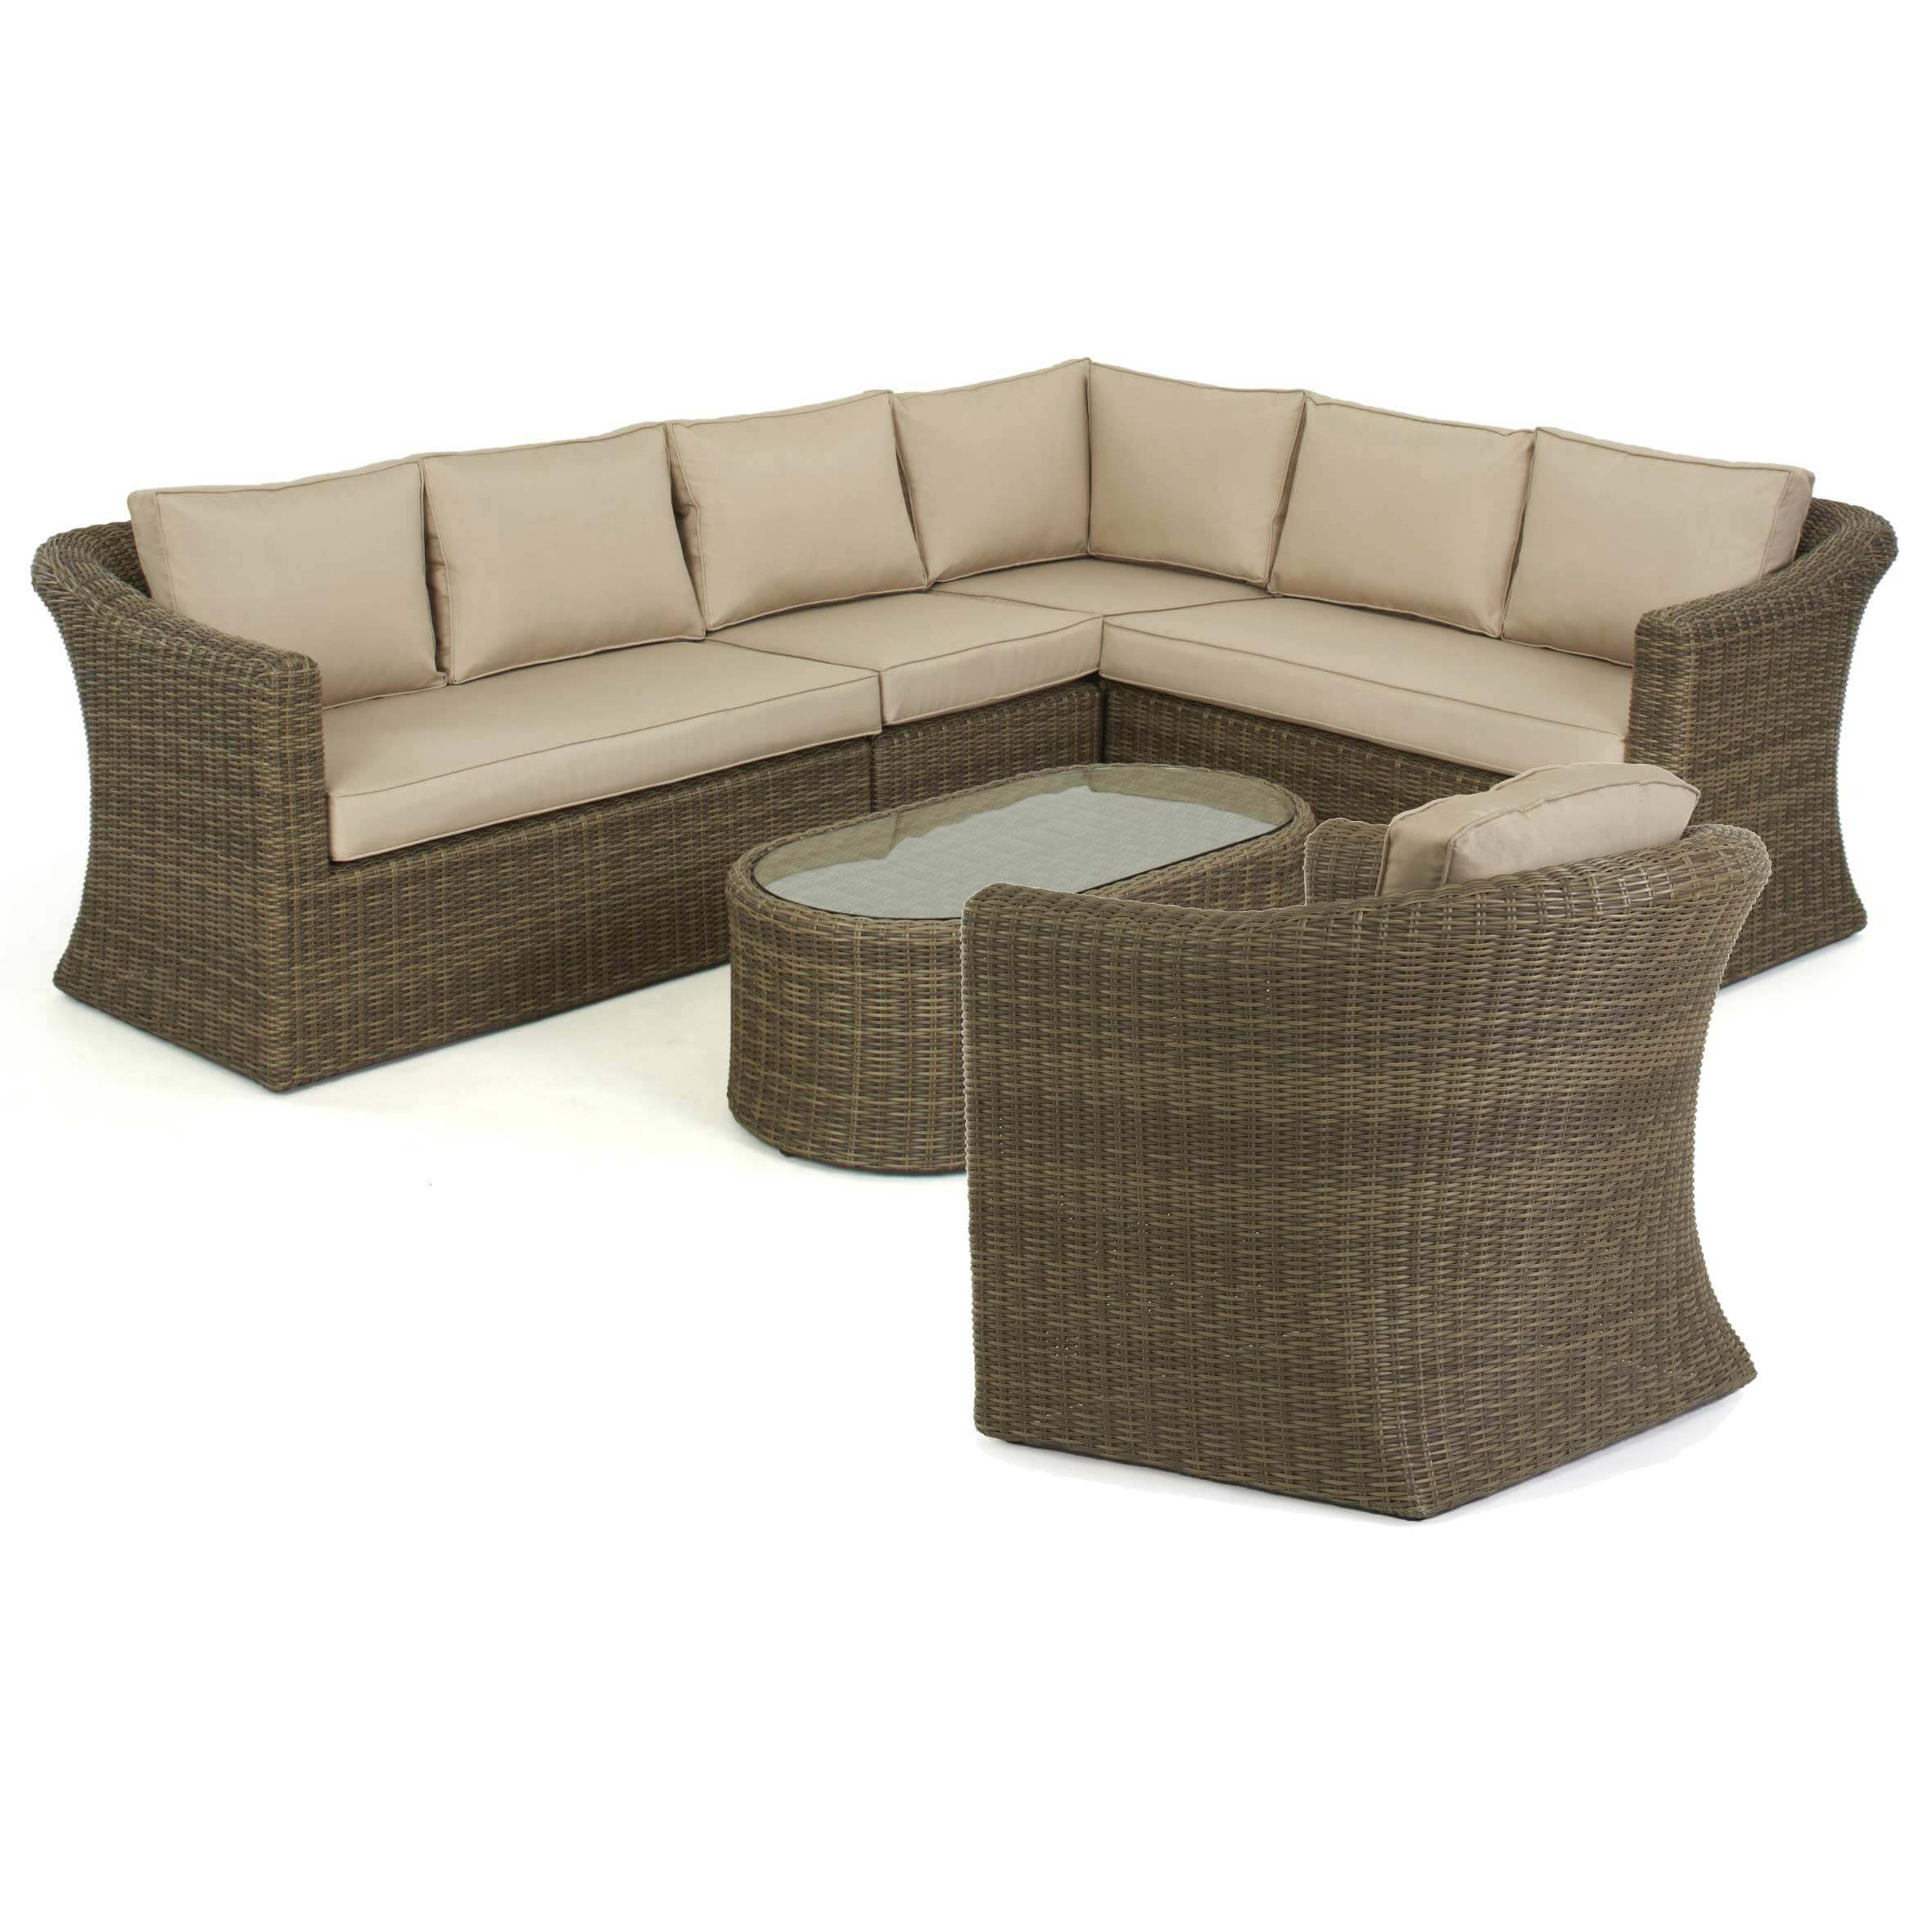 Natural coloured rattan corner sofa with matching armchair and oval coffee table.